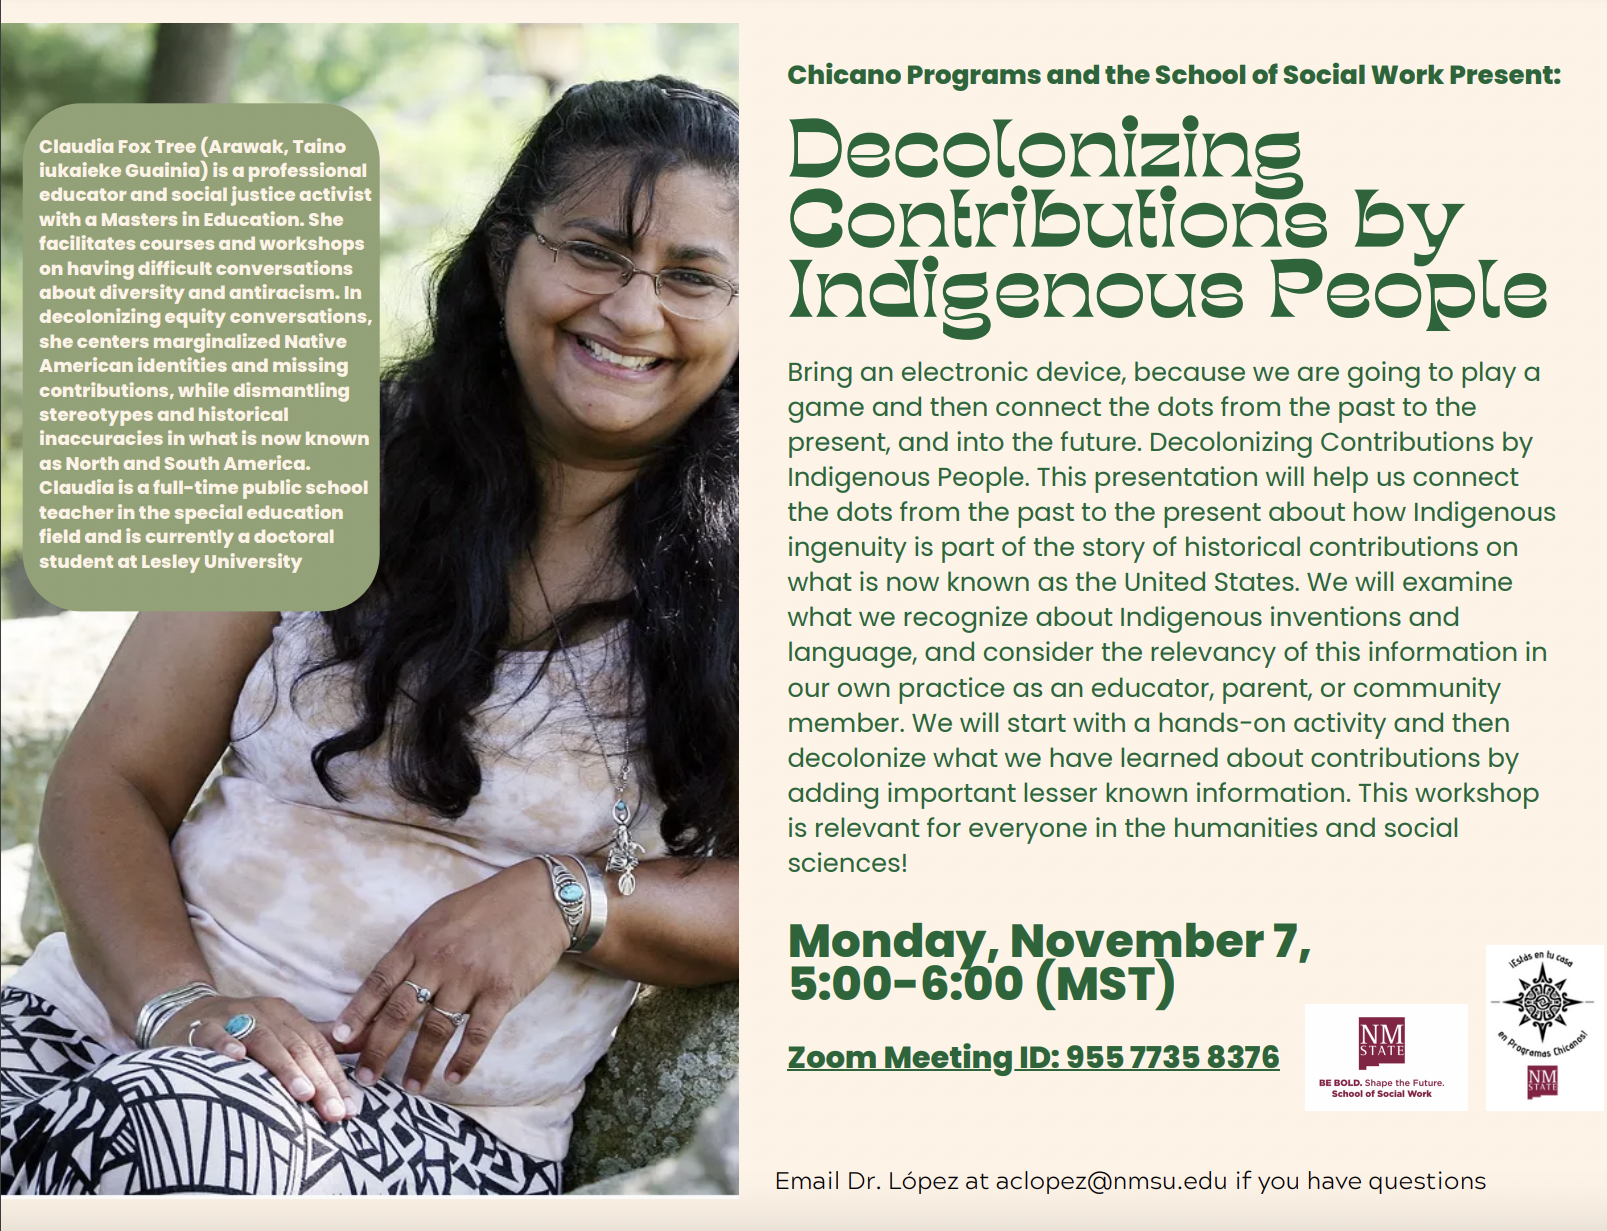 Decolonizing Contributions by Indigenous People